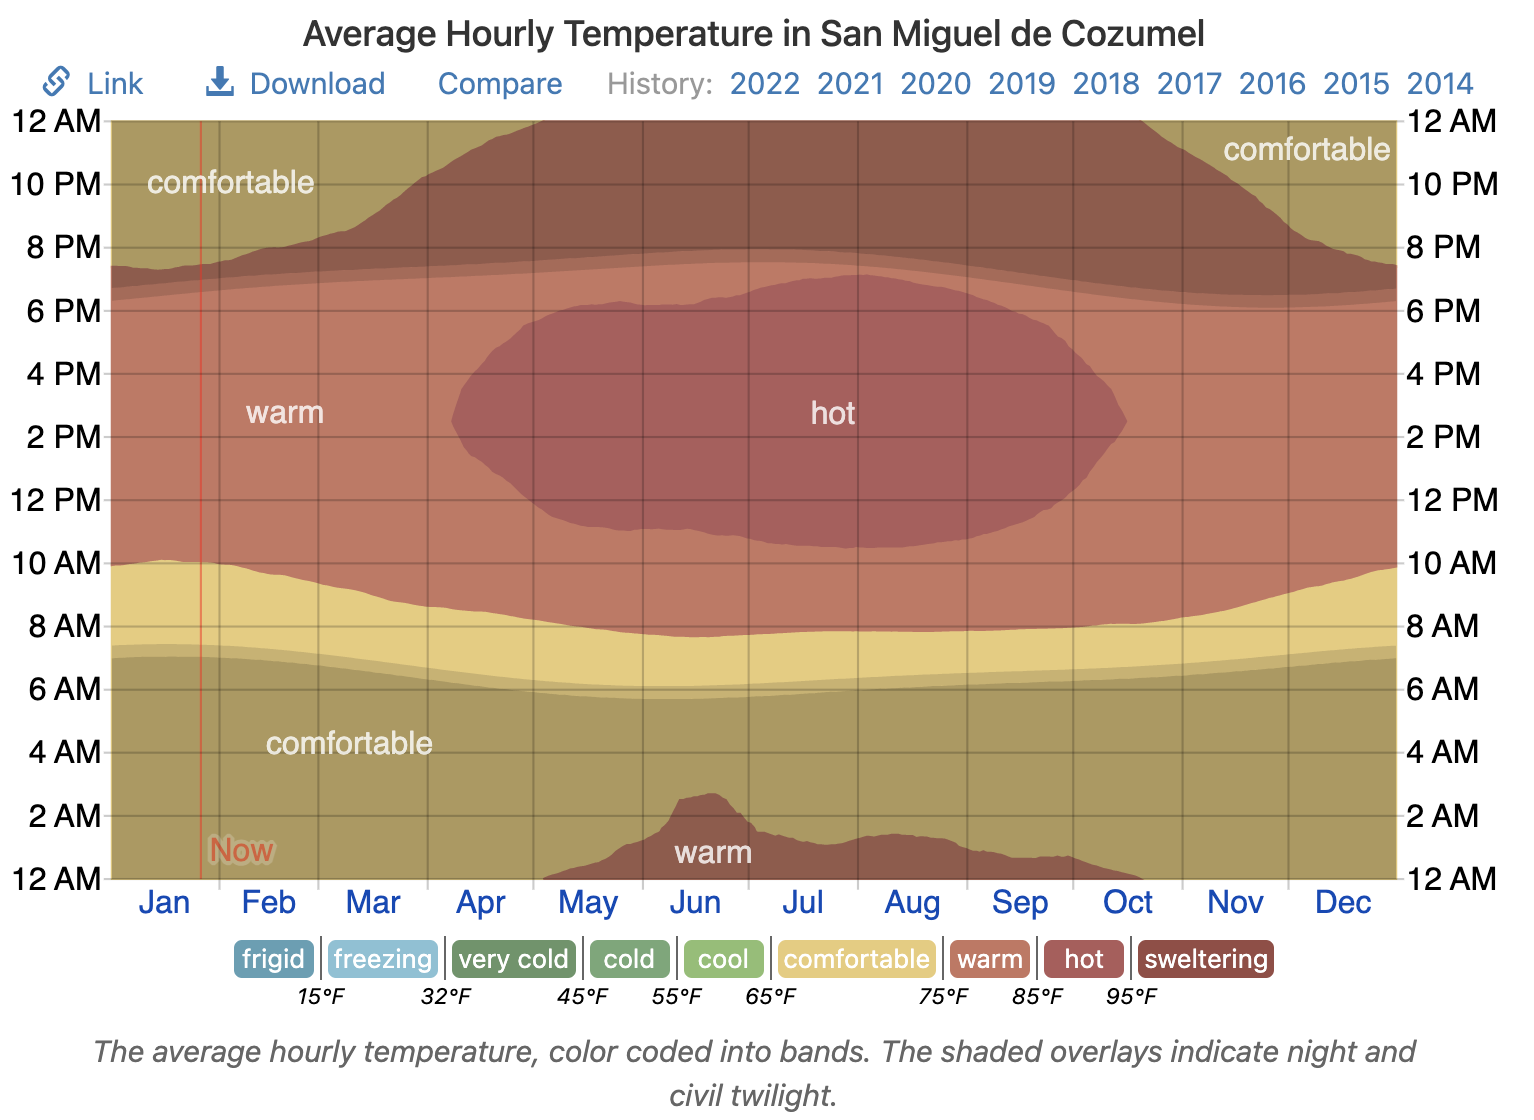 https://weatherspark.com/y/14482/Average-Weather-in-San-Miguel-de-Cozumel-Mexico-Year-Round#Sections-Temperature